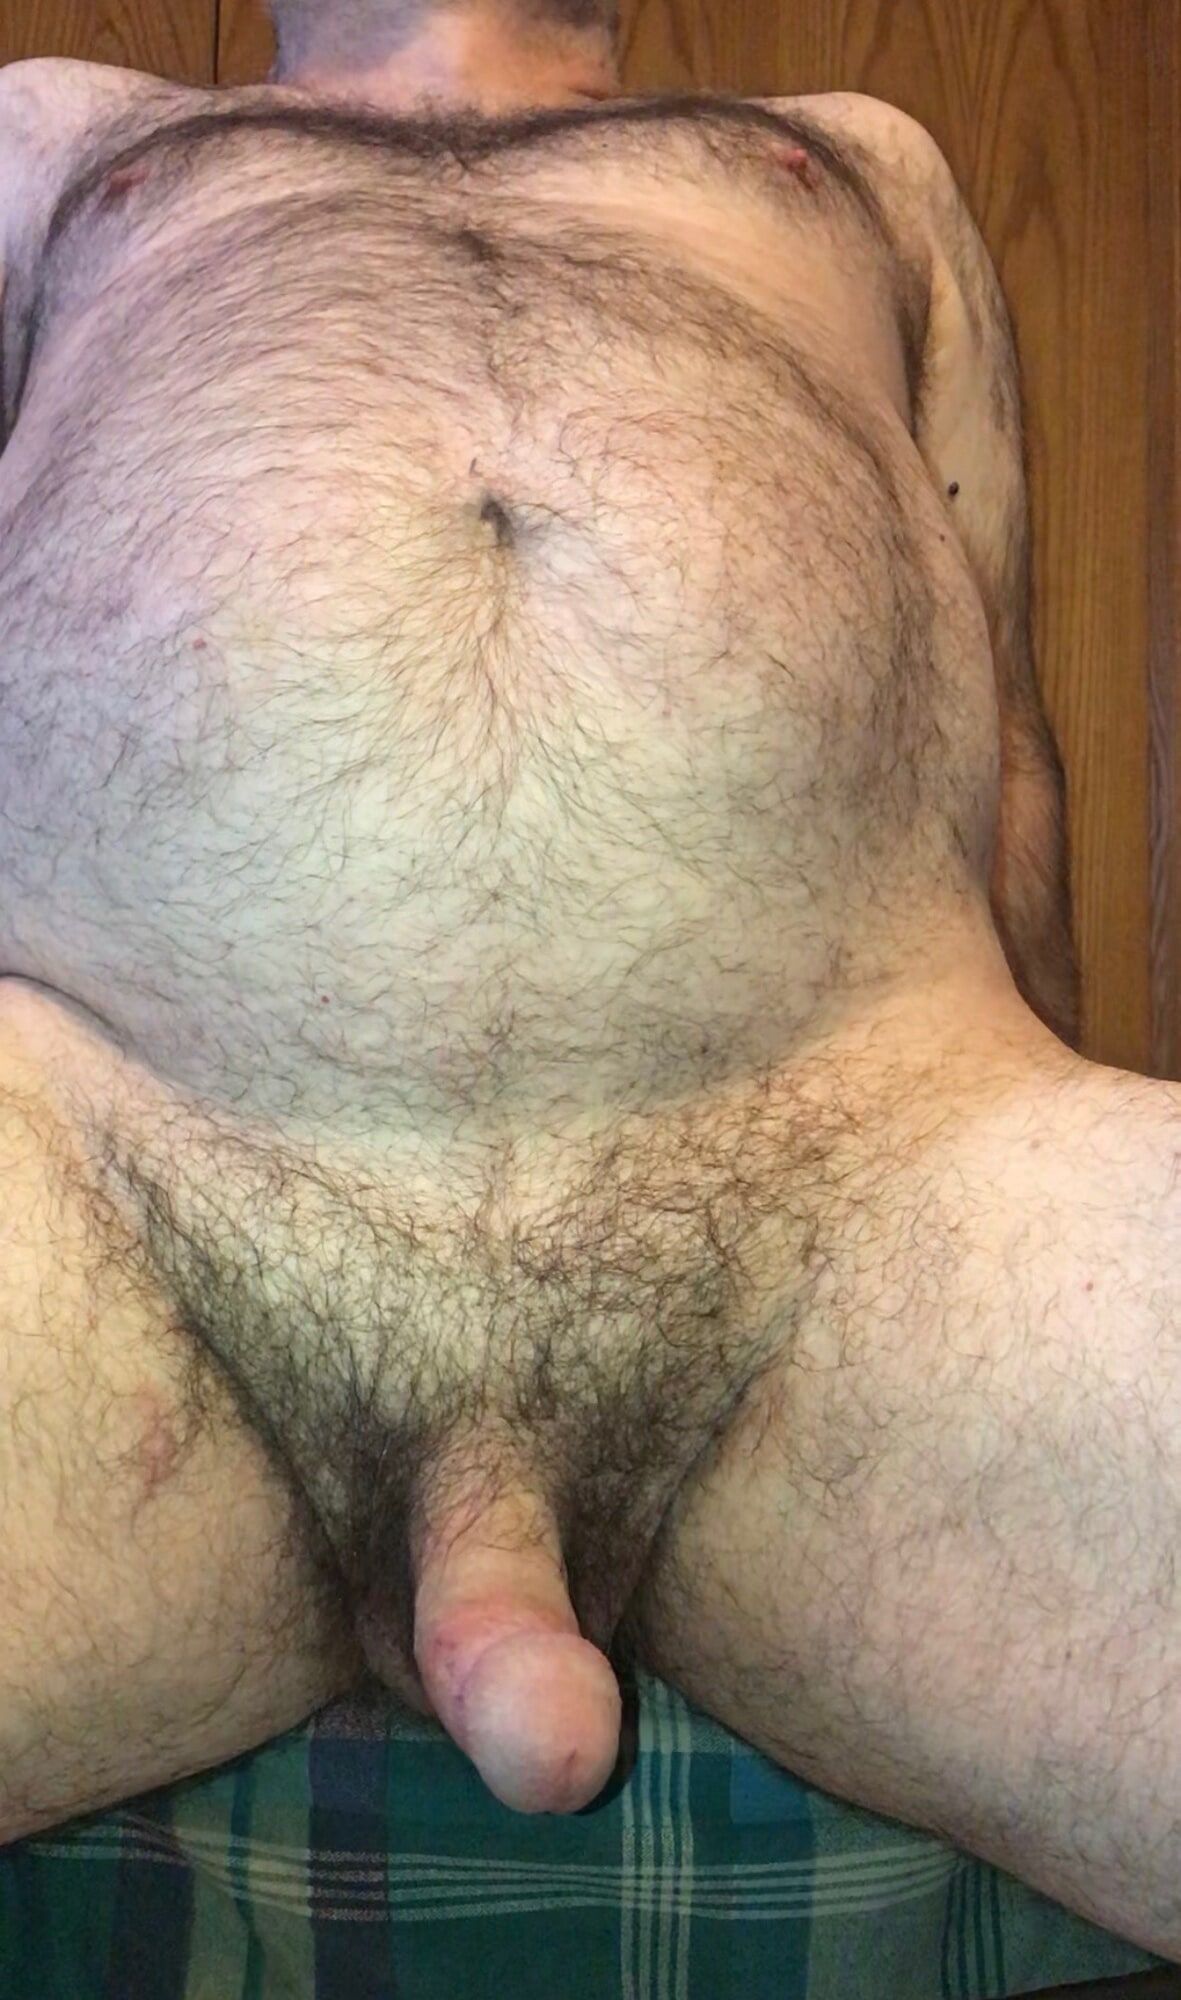 Jackmore1972’s gallery of his cock, part 1.  #4